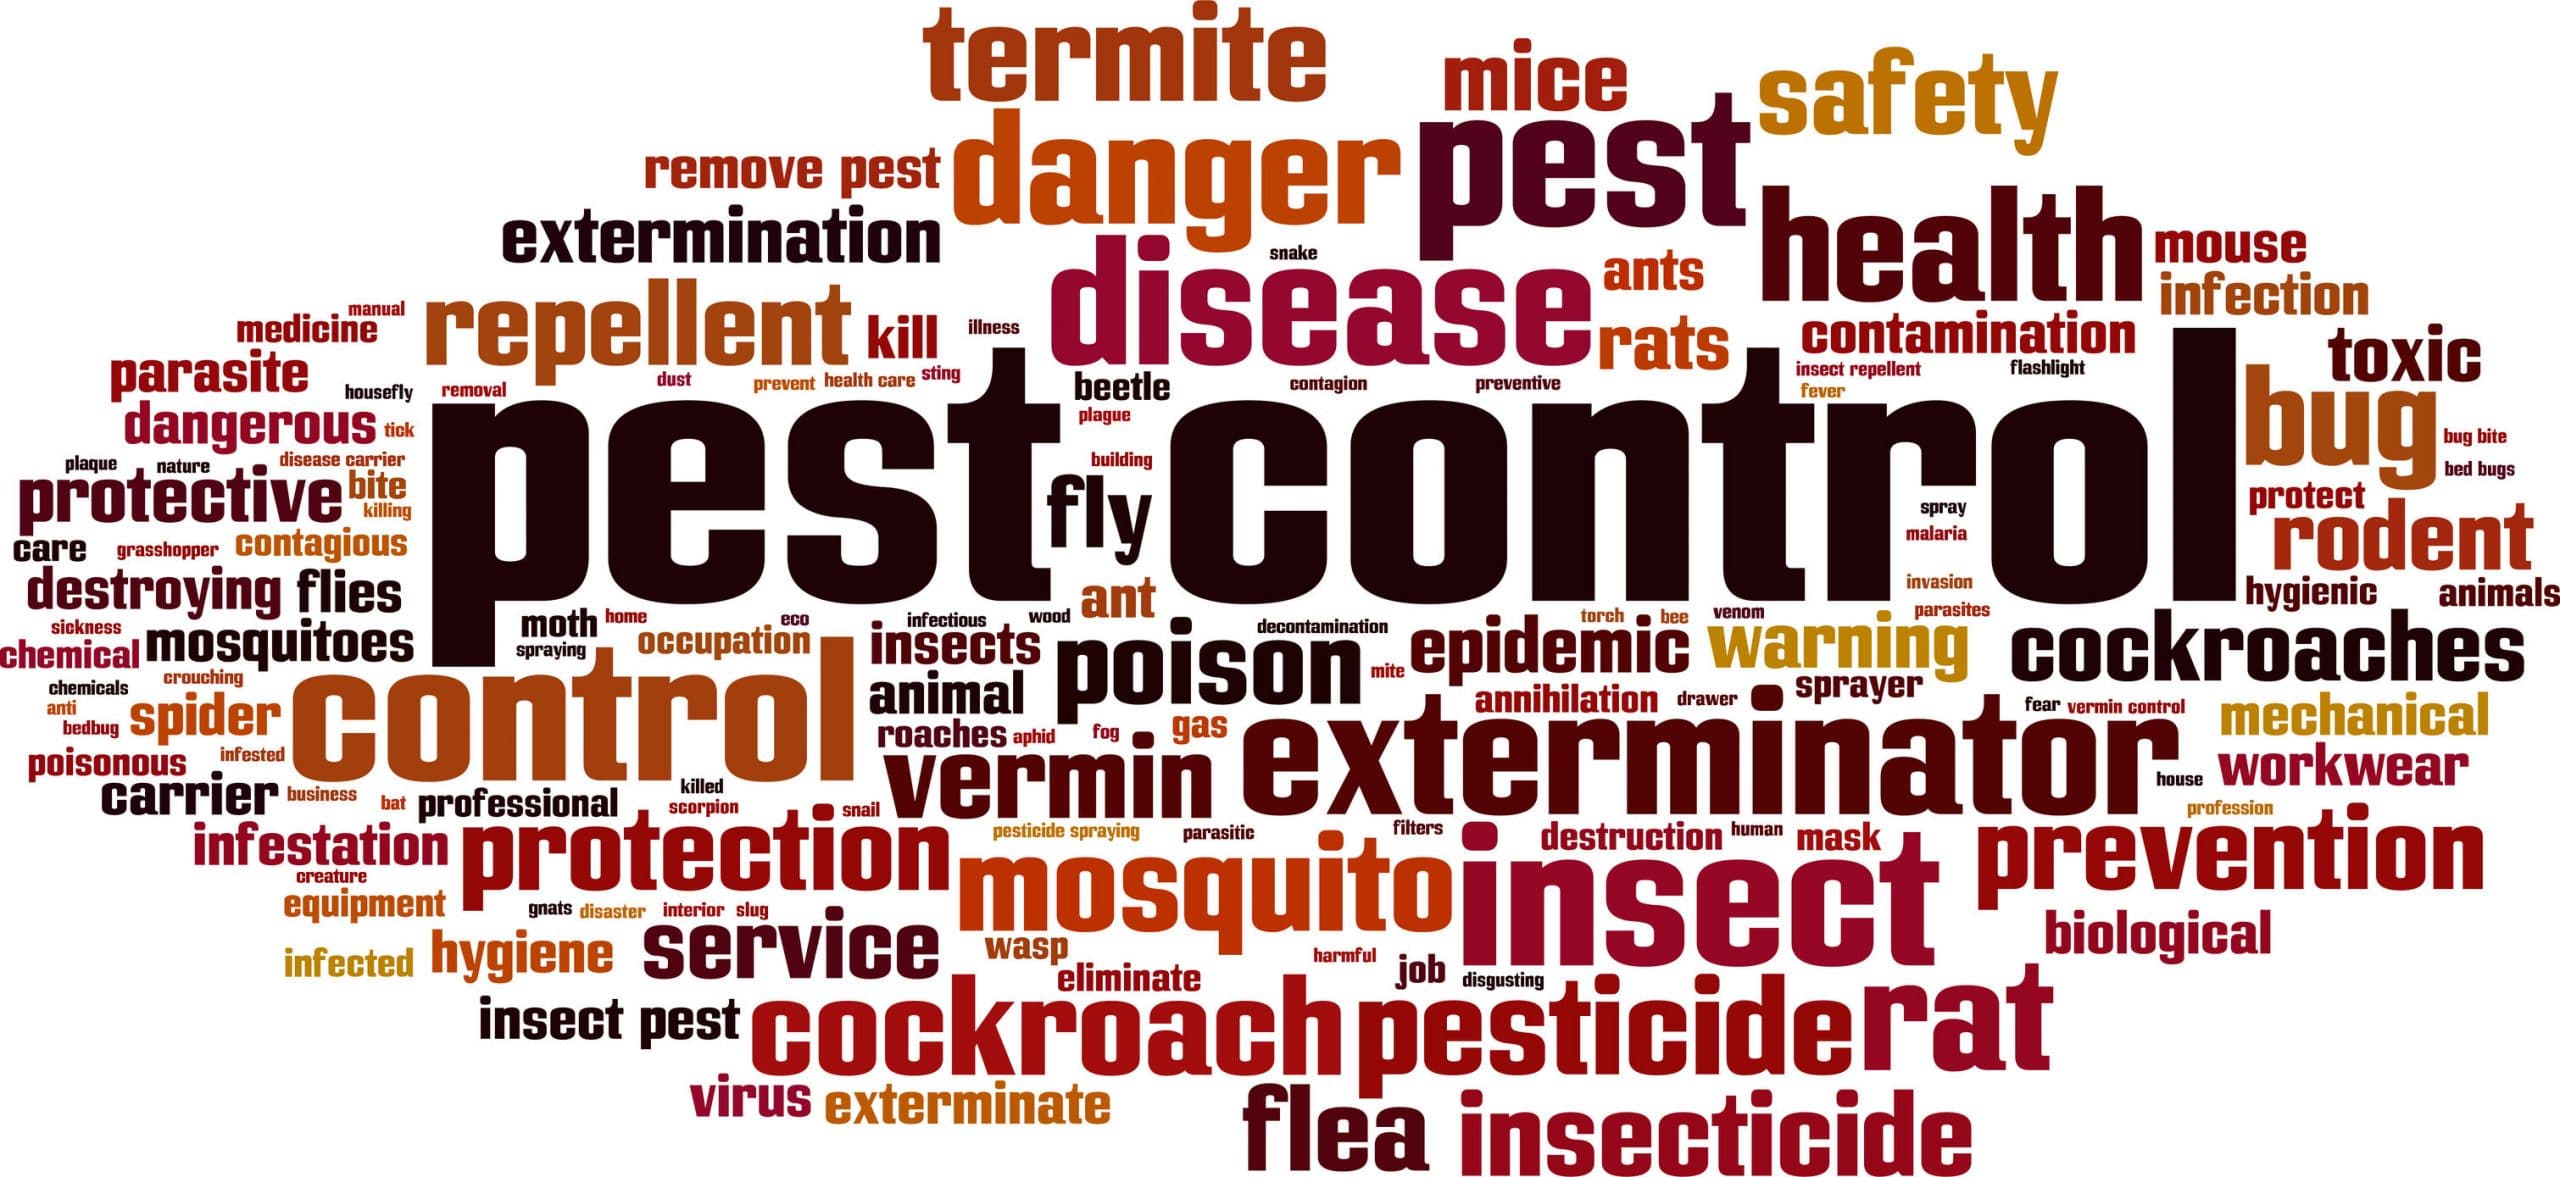 Pest Control & Extermination Services in Toronto & the GTA